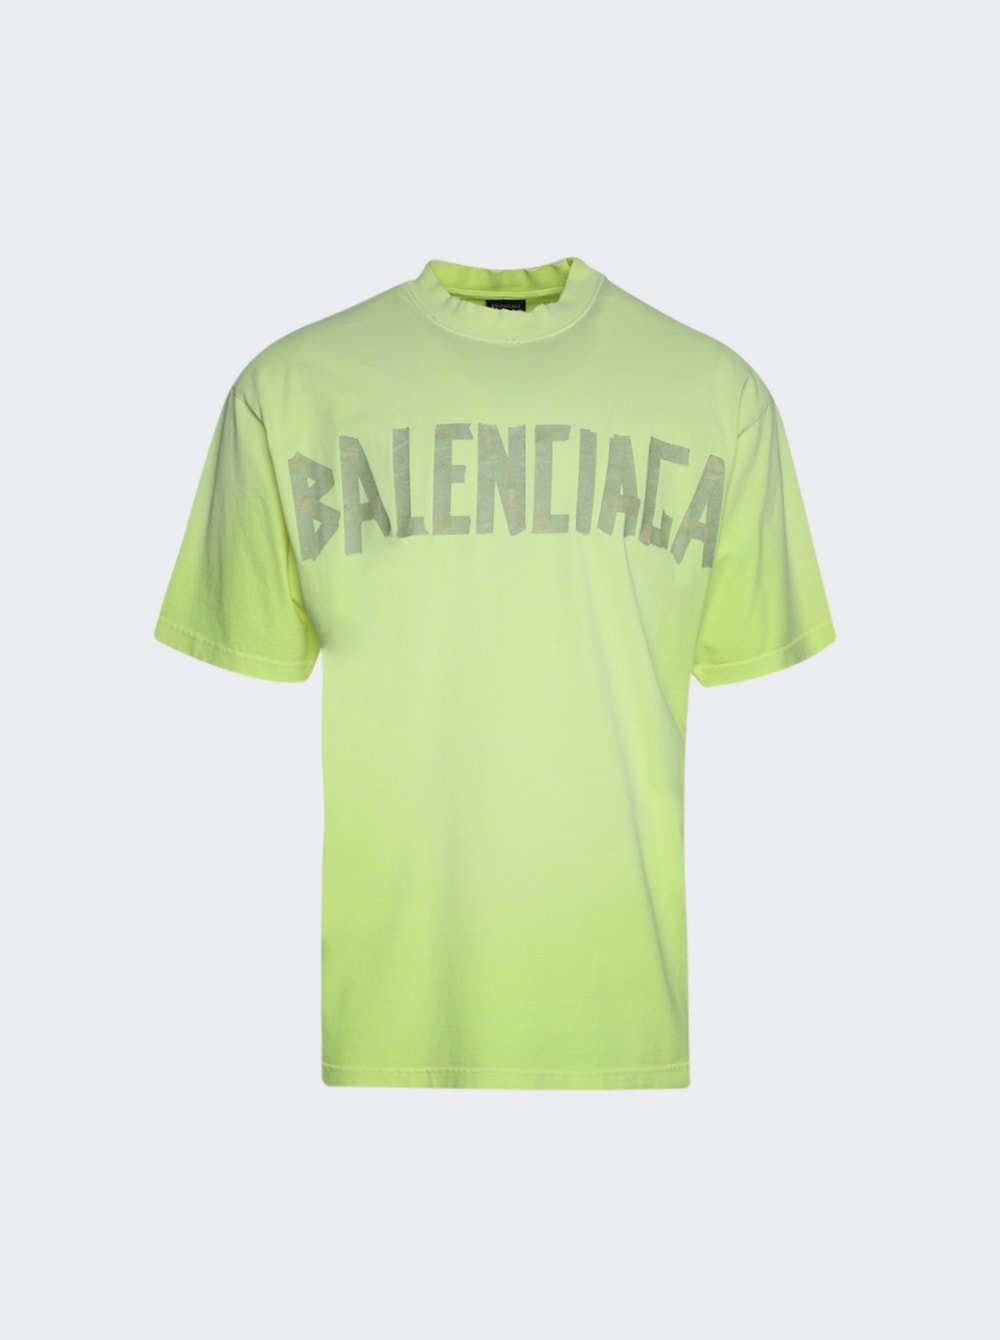 Balenciaga MEN'S DESTROYED T-SHIRT BOXY FIT IN GREEN Size M